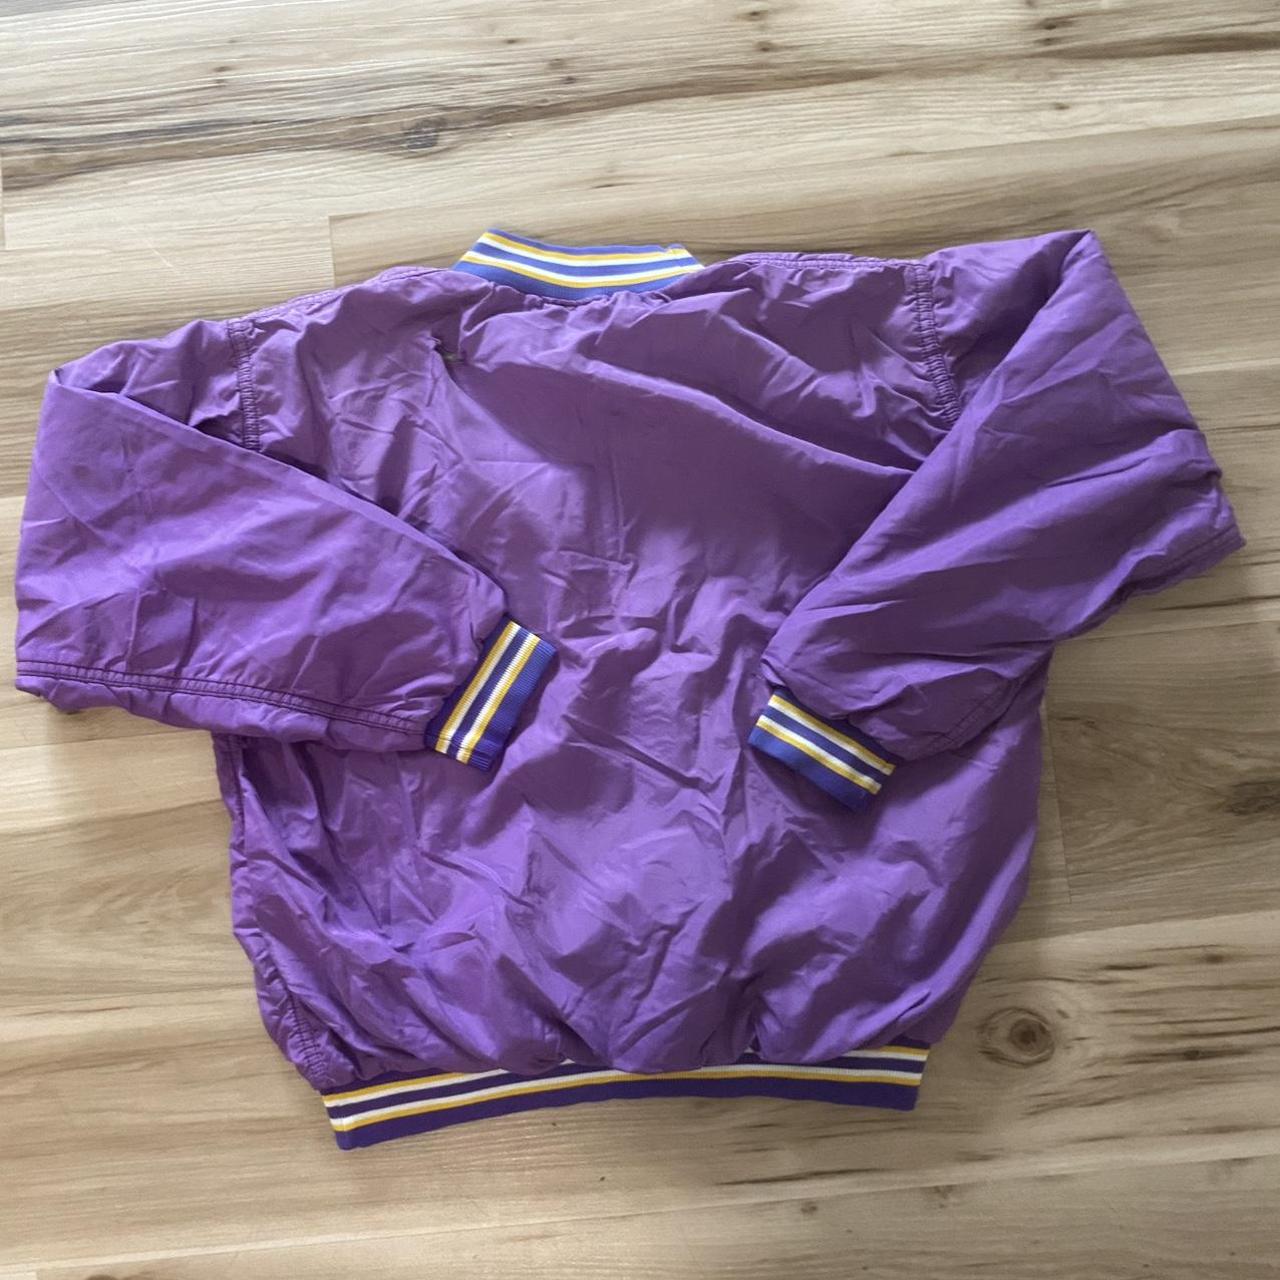 Russell Athletic Men's Purple and Yellow Jacket | Depop